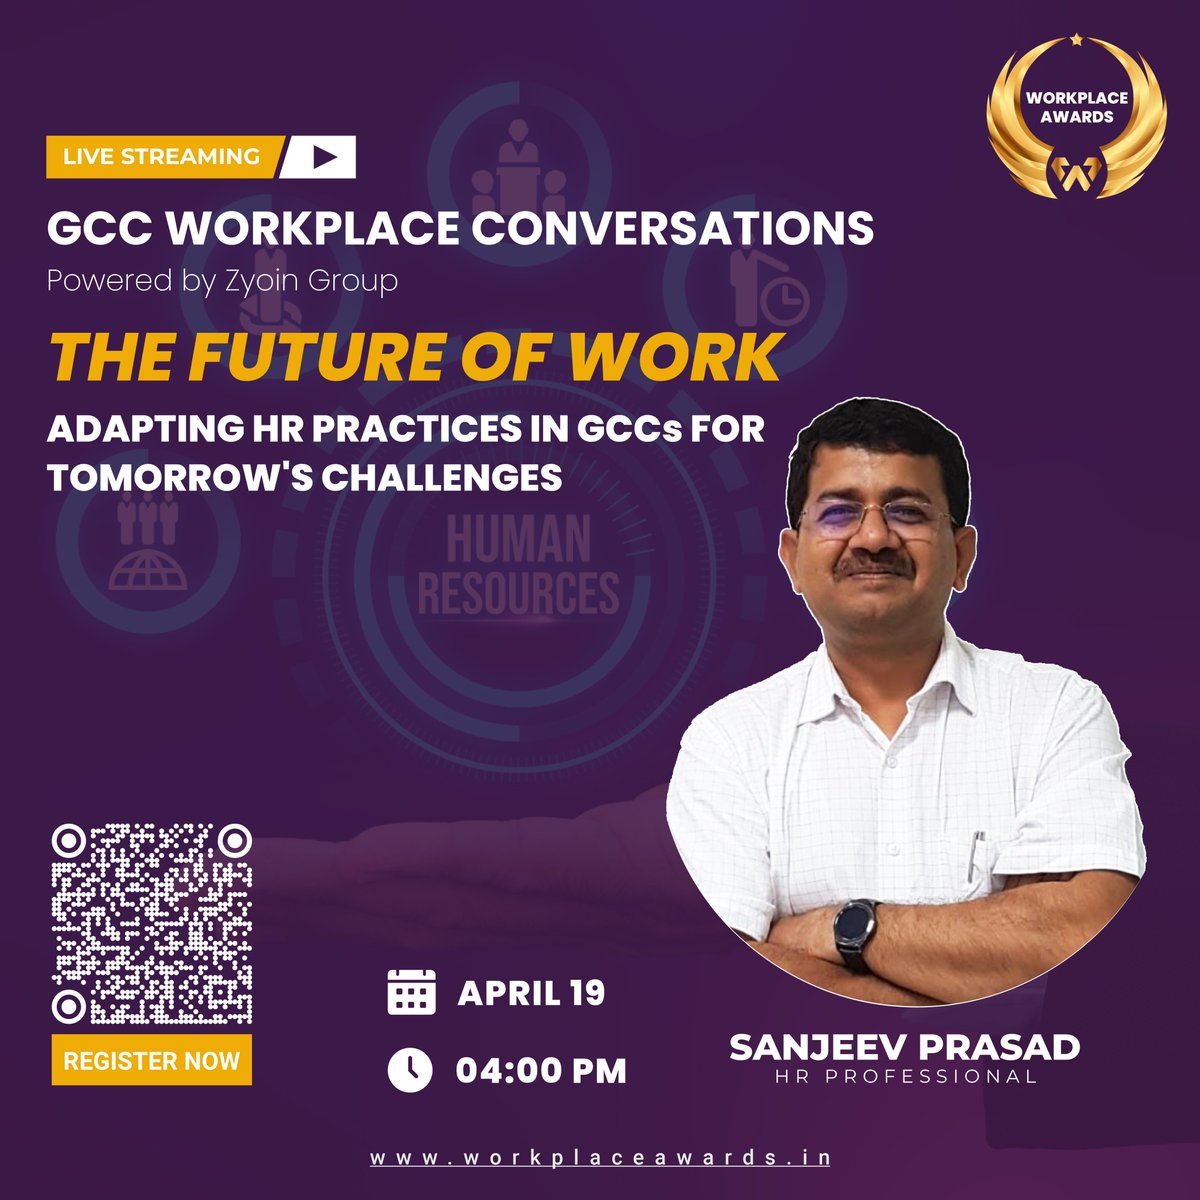 Introducing Sanjeev Prasad, our first speaker for the Workplace Conversation webinar on ‘The Future of Work: Adapting HR Practices in GCCs for Tomorrow's Challenges’

#WorkplaceConversations #TalentAcquisition #GlobalSuccess #GCCLeadership #HRInsights #RecruitmentStrategies